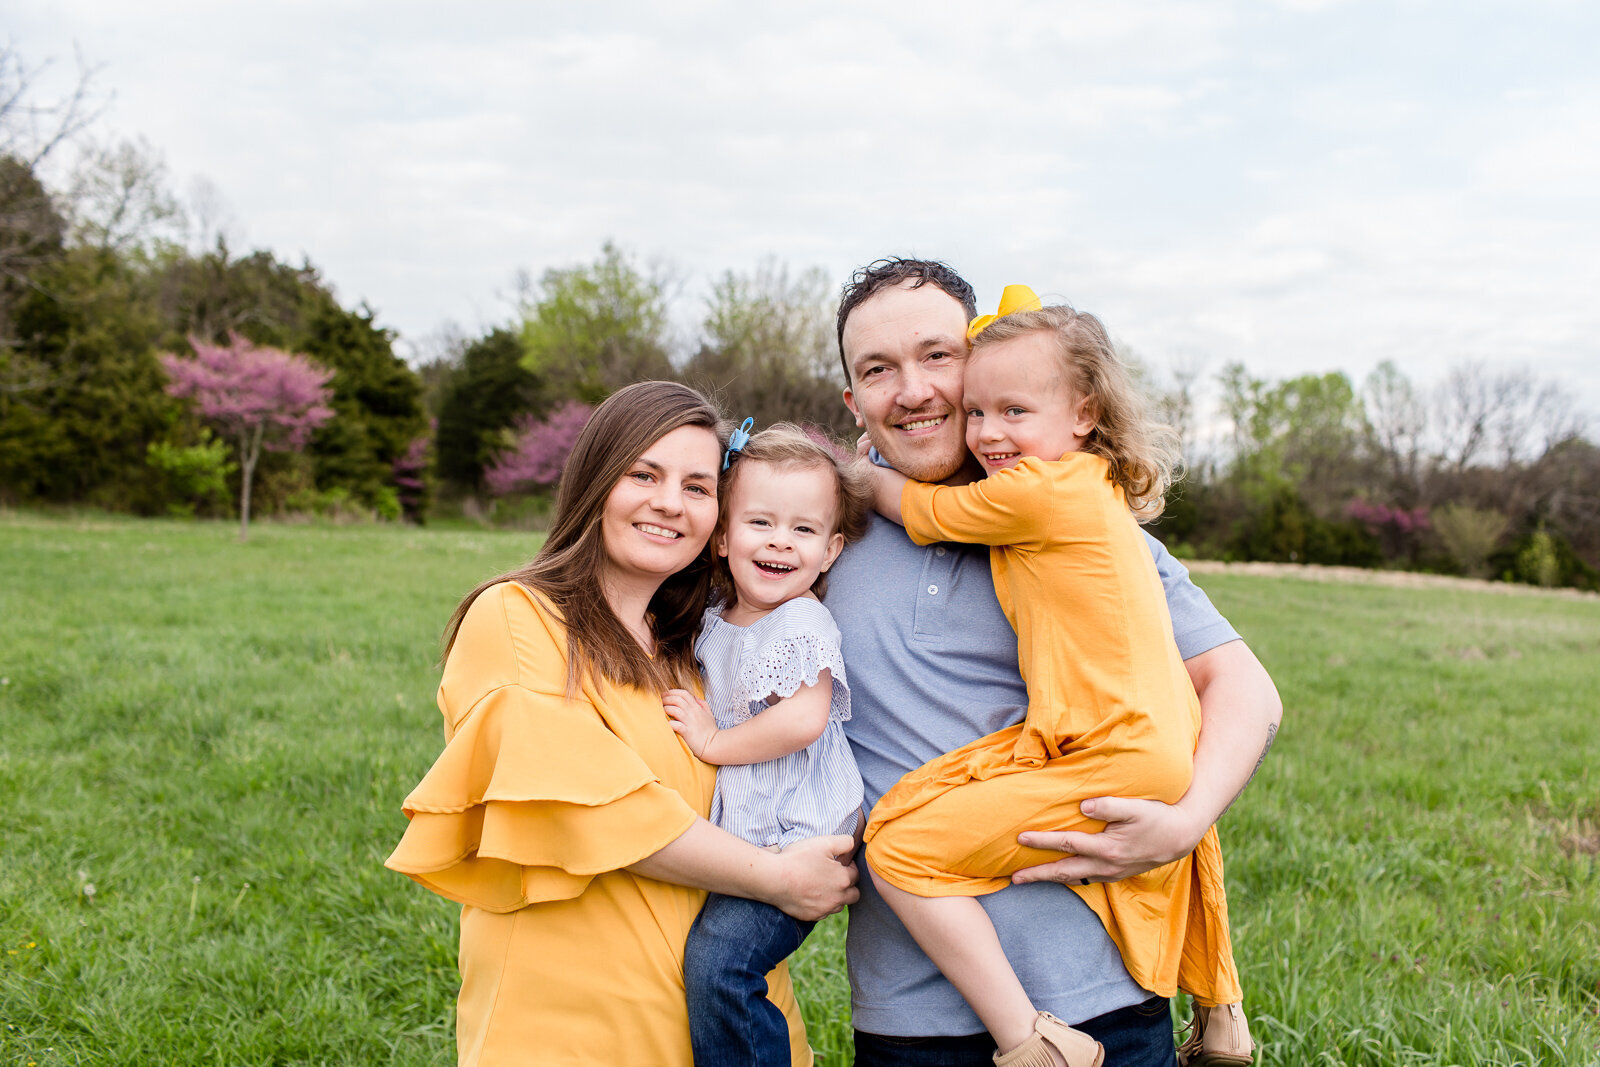 spring_outdoor_family_lifestyle_photography_session_Frankfort_KY_photographer-5